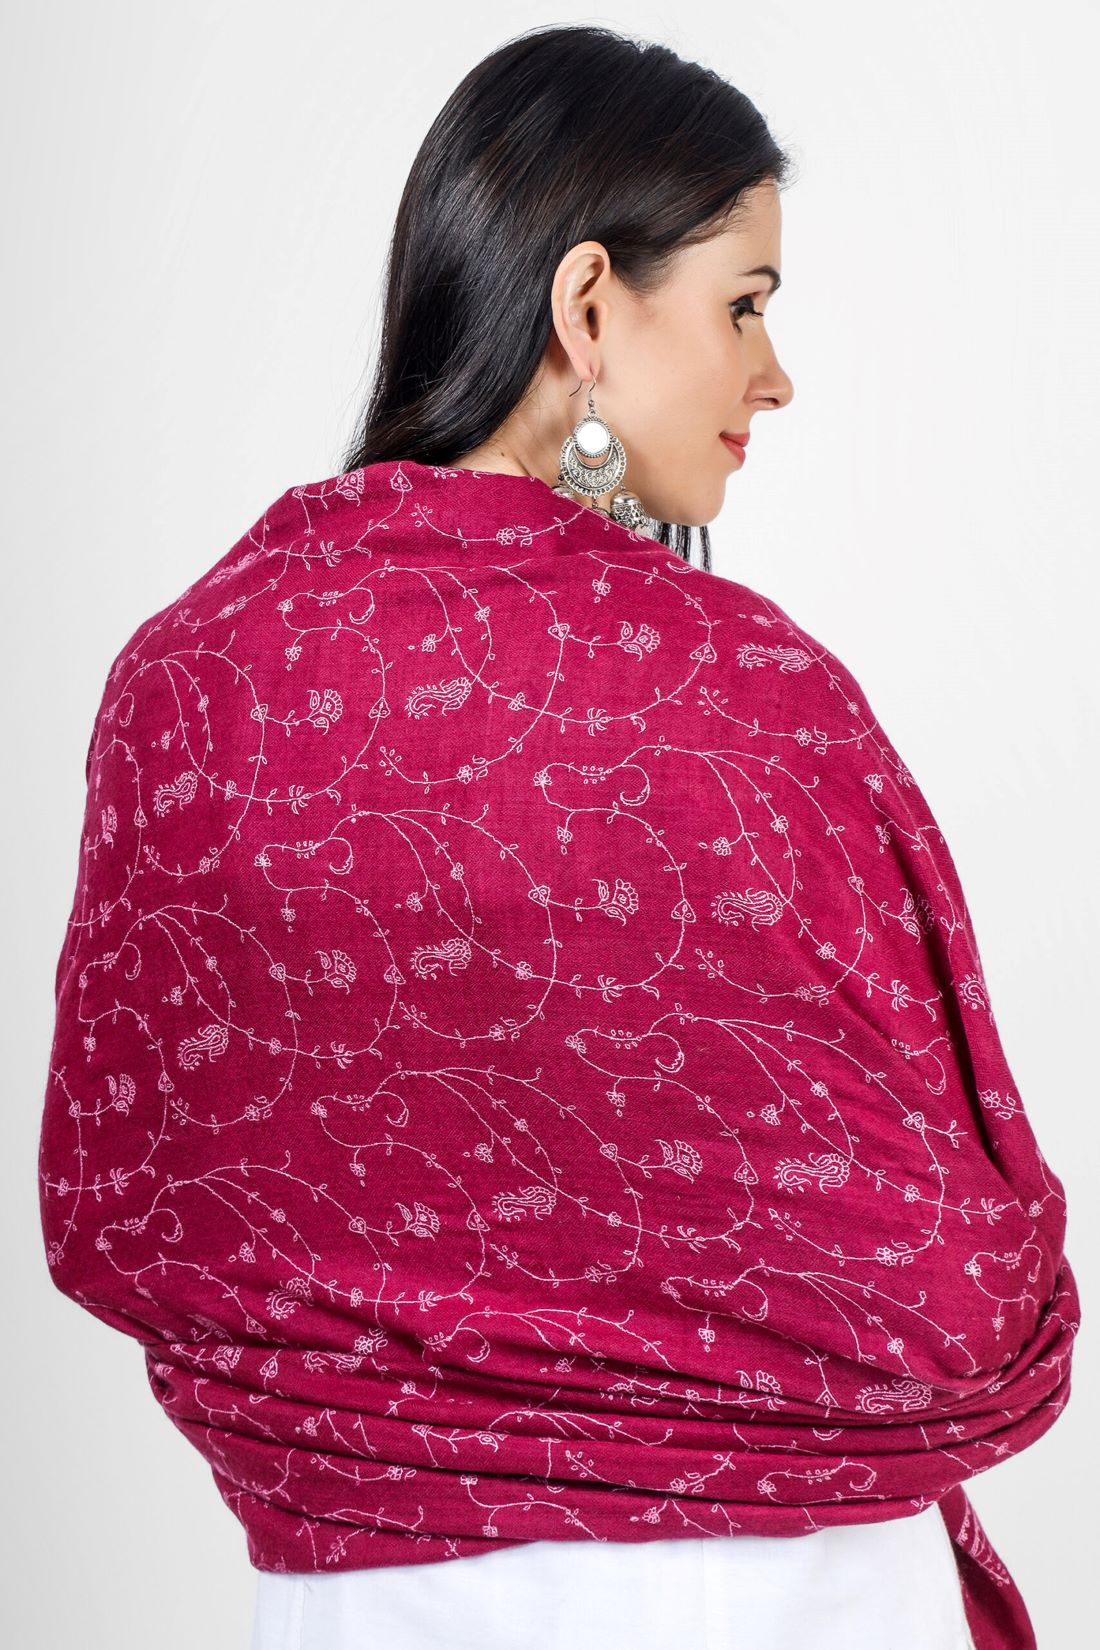 PASHMINA SHAWLS - A Plum Velvet Pink Pashmina Jaldaar Embroidered Shawl is a luxurious and elegant shawl made from high-quality pashmina wool. The shawl is designed with a unique Jaldaar pattern that features intricate weaving and embroidery with fine silk threads.